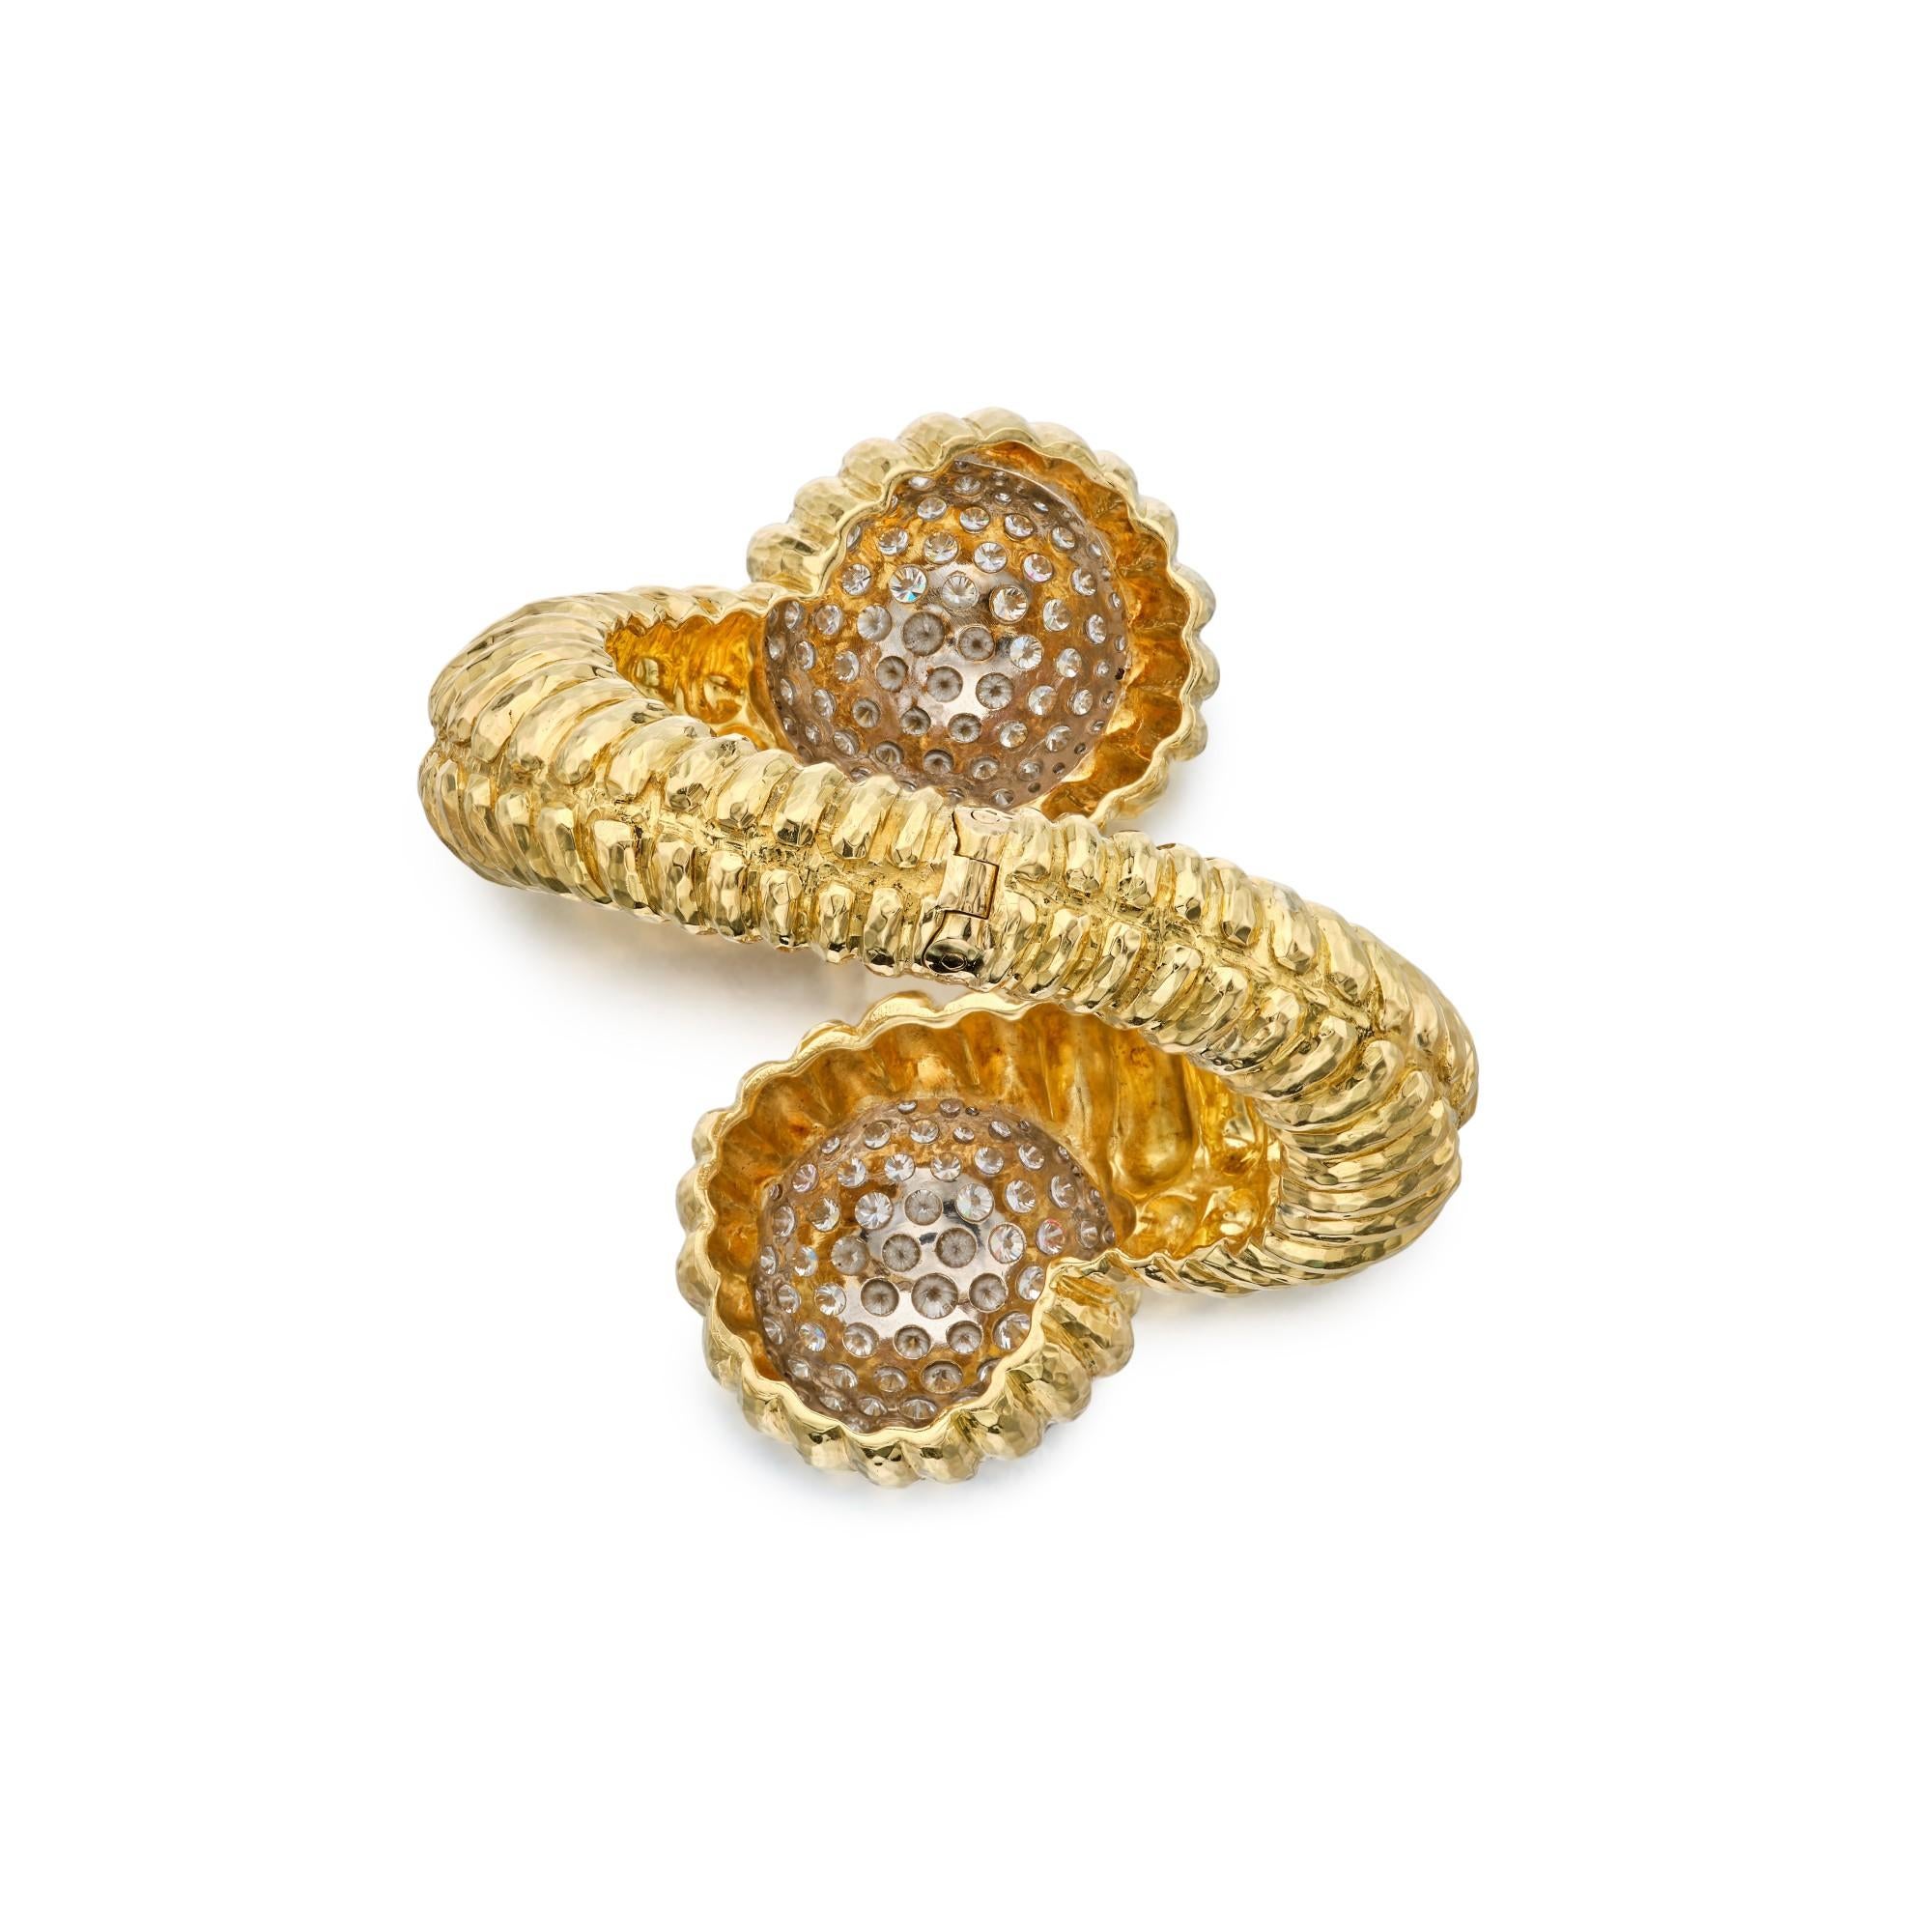 1960's David Webb Diamond and Gold Bracelet This bracelet has a bypass design composed of fluted
hammered 18k yellow gold. Each end of the bracelet accented with with round brilliant diamonds with a total carat weight of approximately 24 carat,